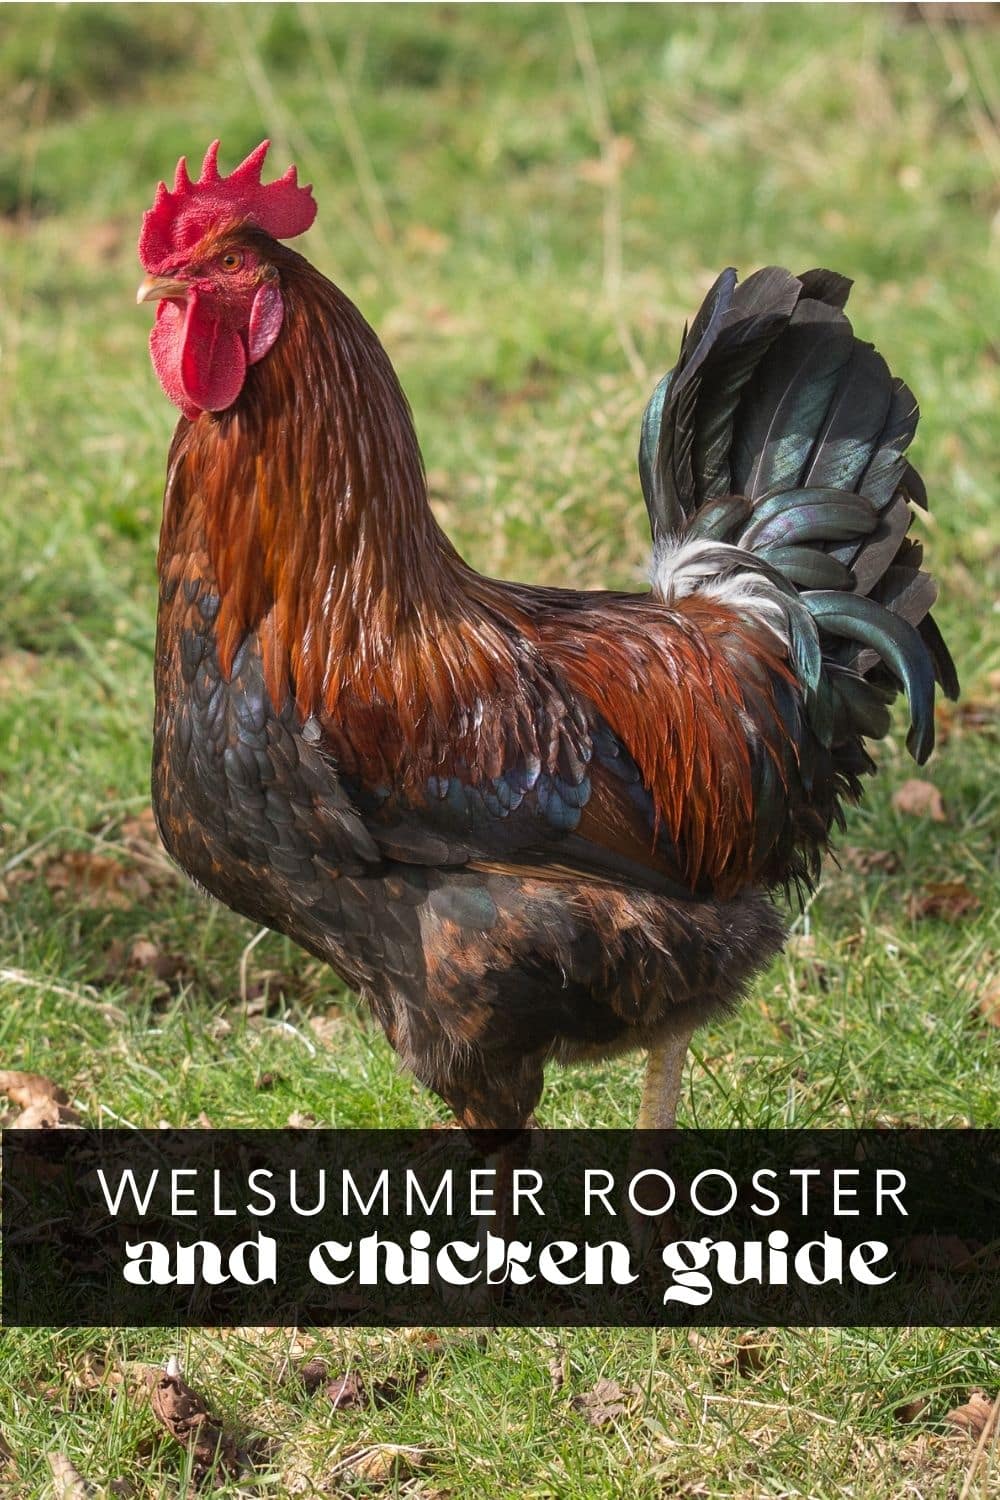 Welsummer chickens are intelligent, low-maintenance birds that produce beautiful, deep brown, terracotta-colored eggs. This complete guide covers everything you need to know about raising these curious and friendly chickens!